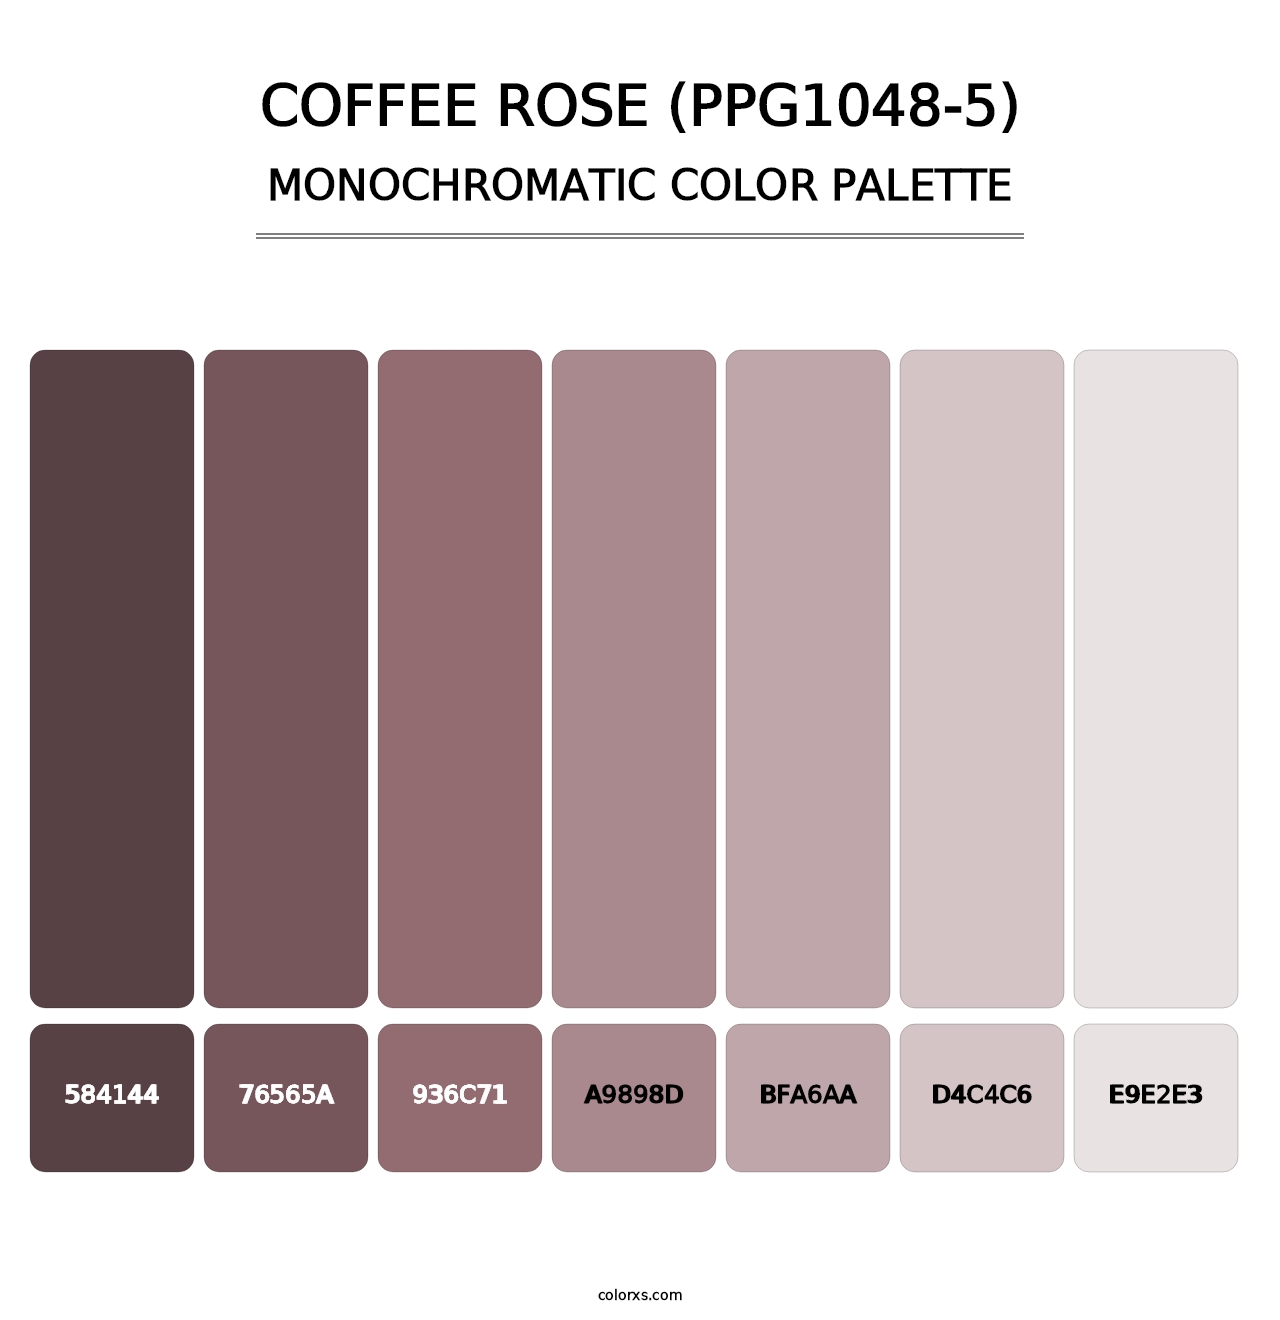 Coffee Rose (PPG1048-5) - Monochromatic Color Palette